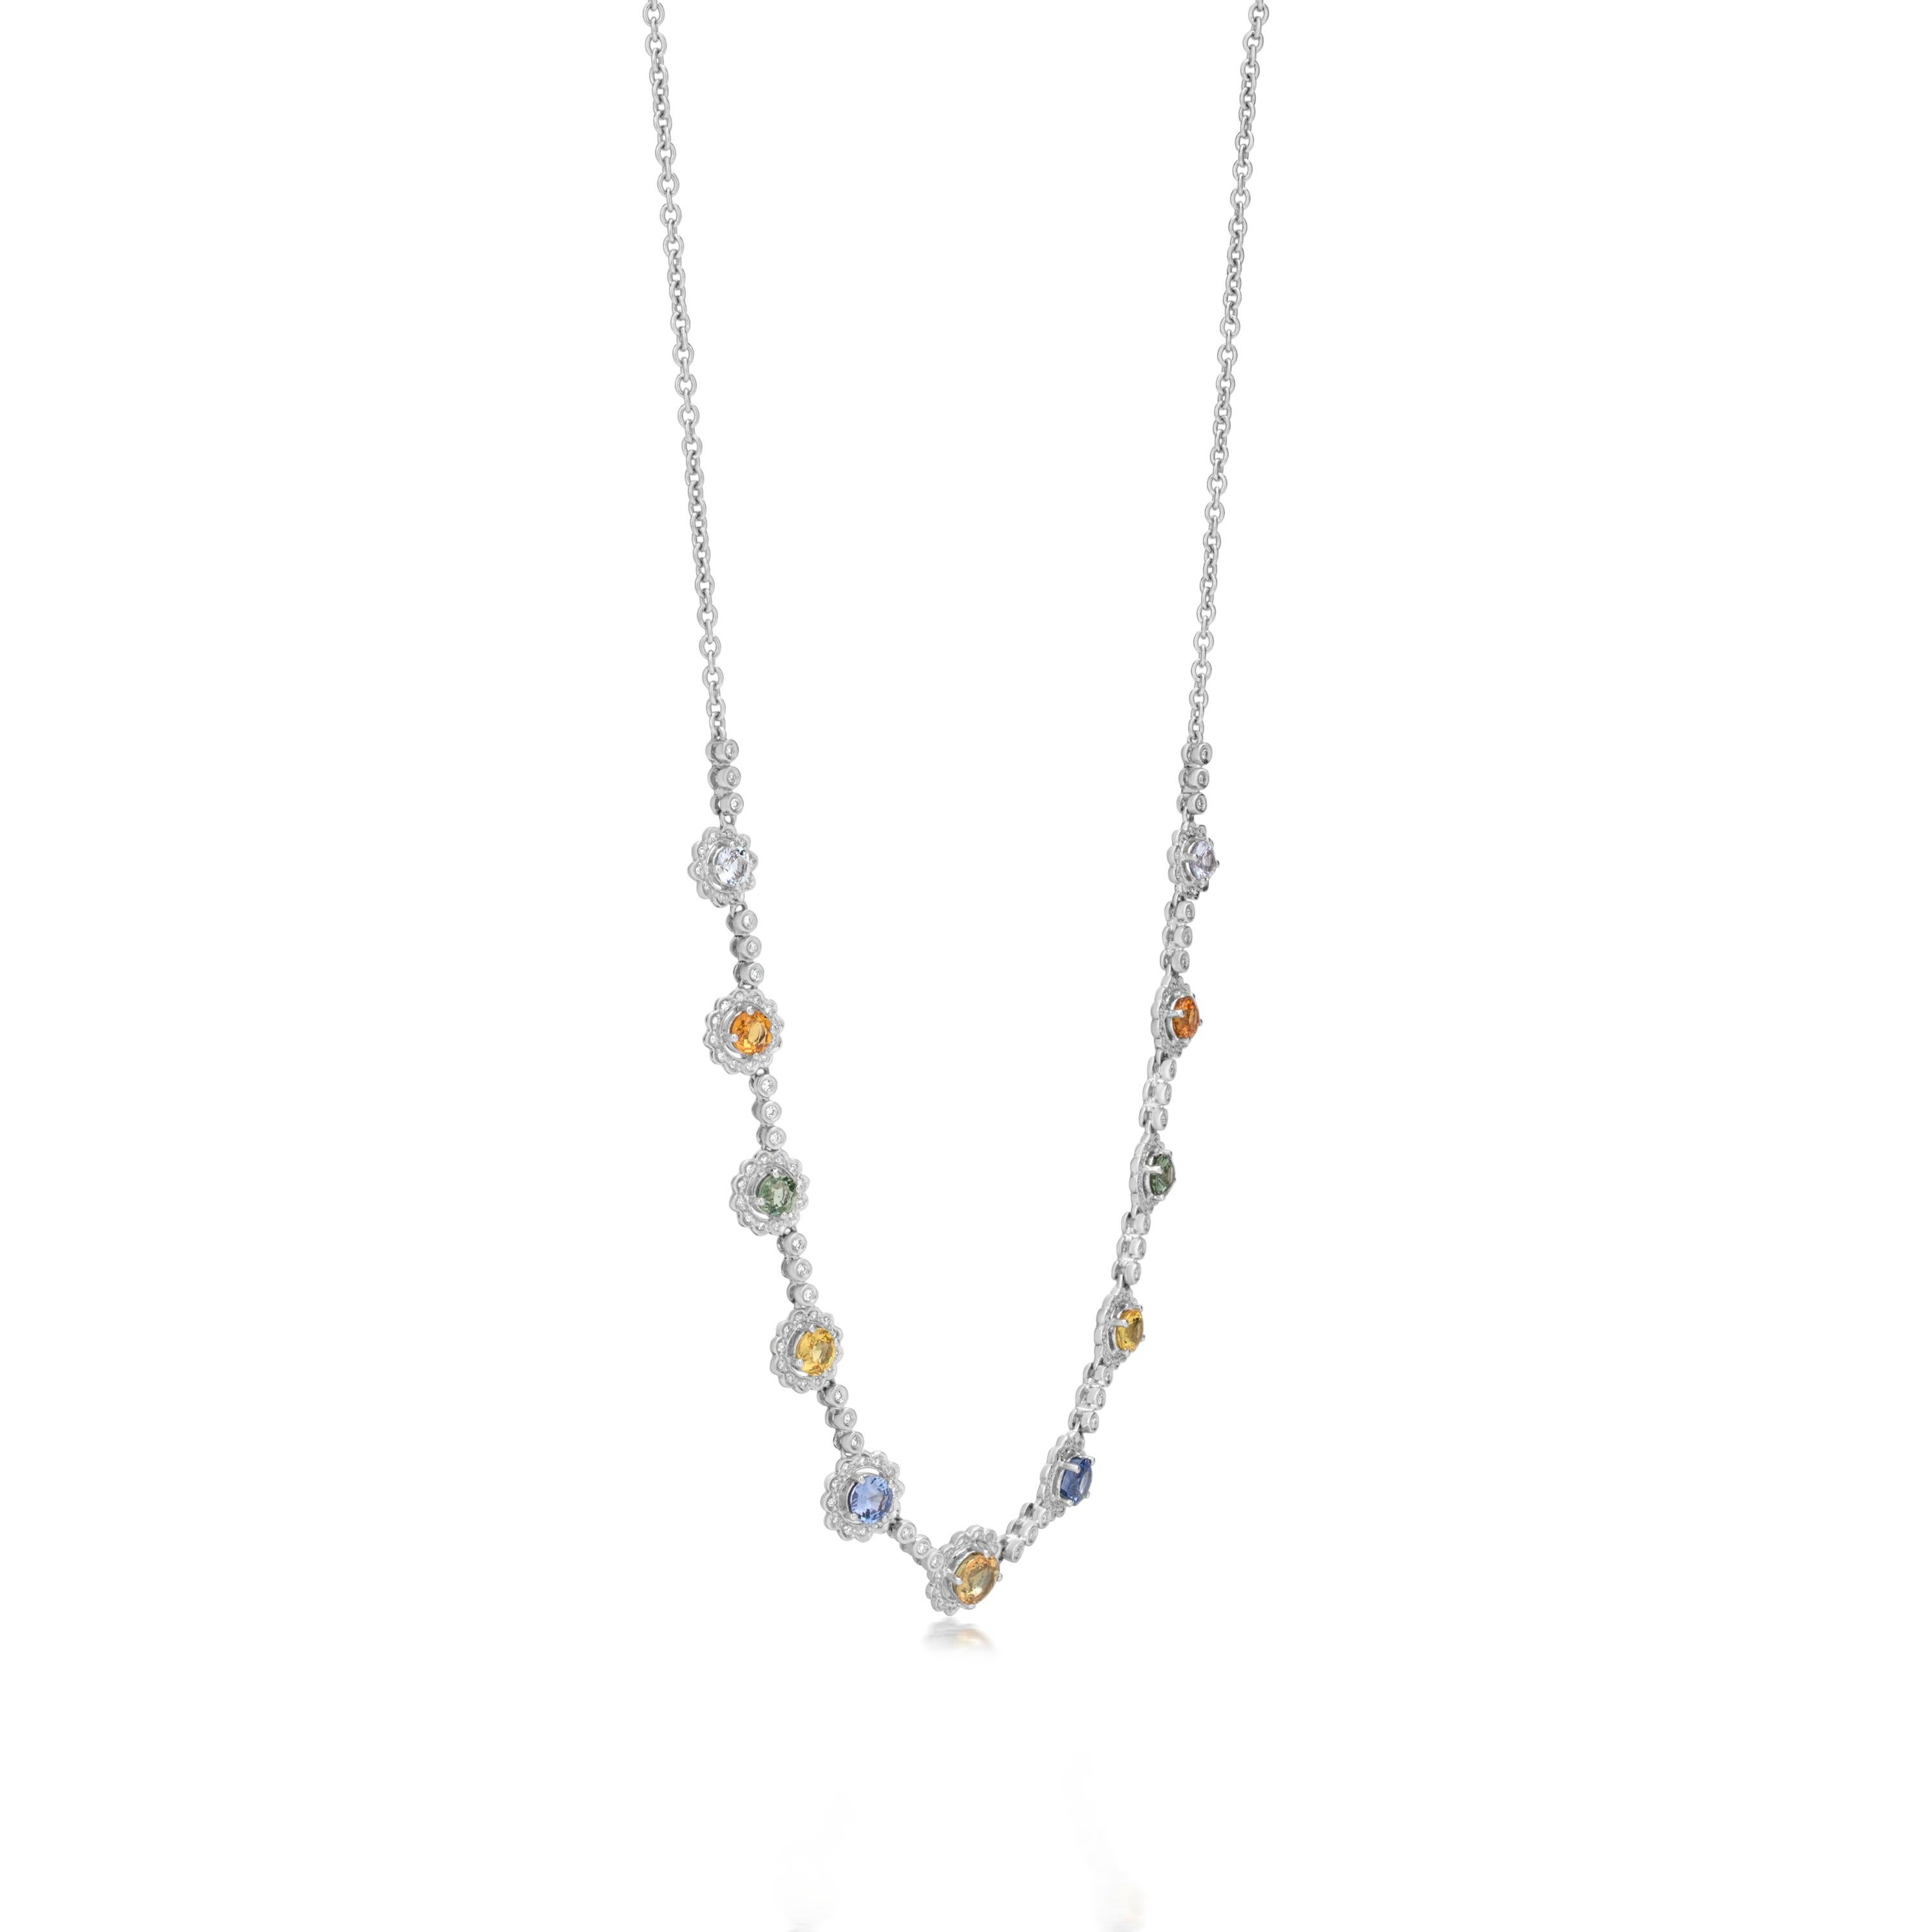 This Gemistry necklace Adds some color into the mix with this eye-catching strand of multi-sapphire totaling 5.5 carats. This station necklace presents multi-sapphire rounds in diamond halos along an 18k white cable chain. Lobster clasp,